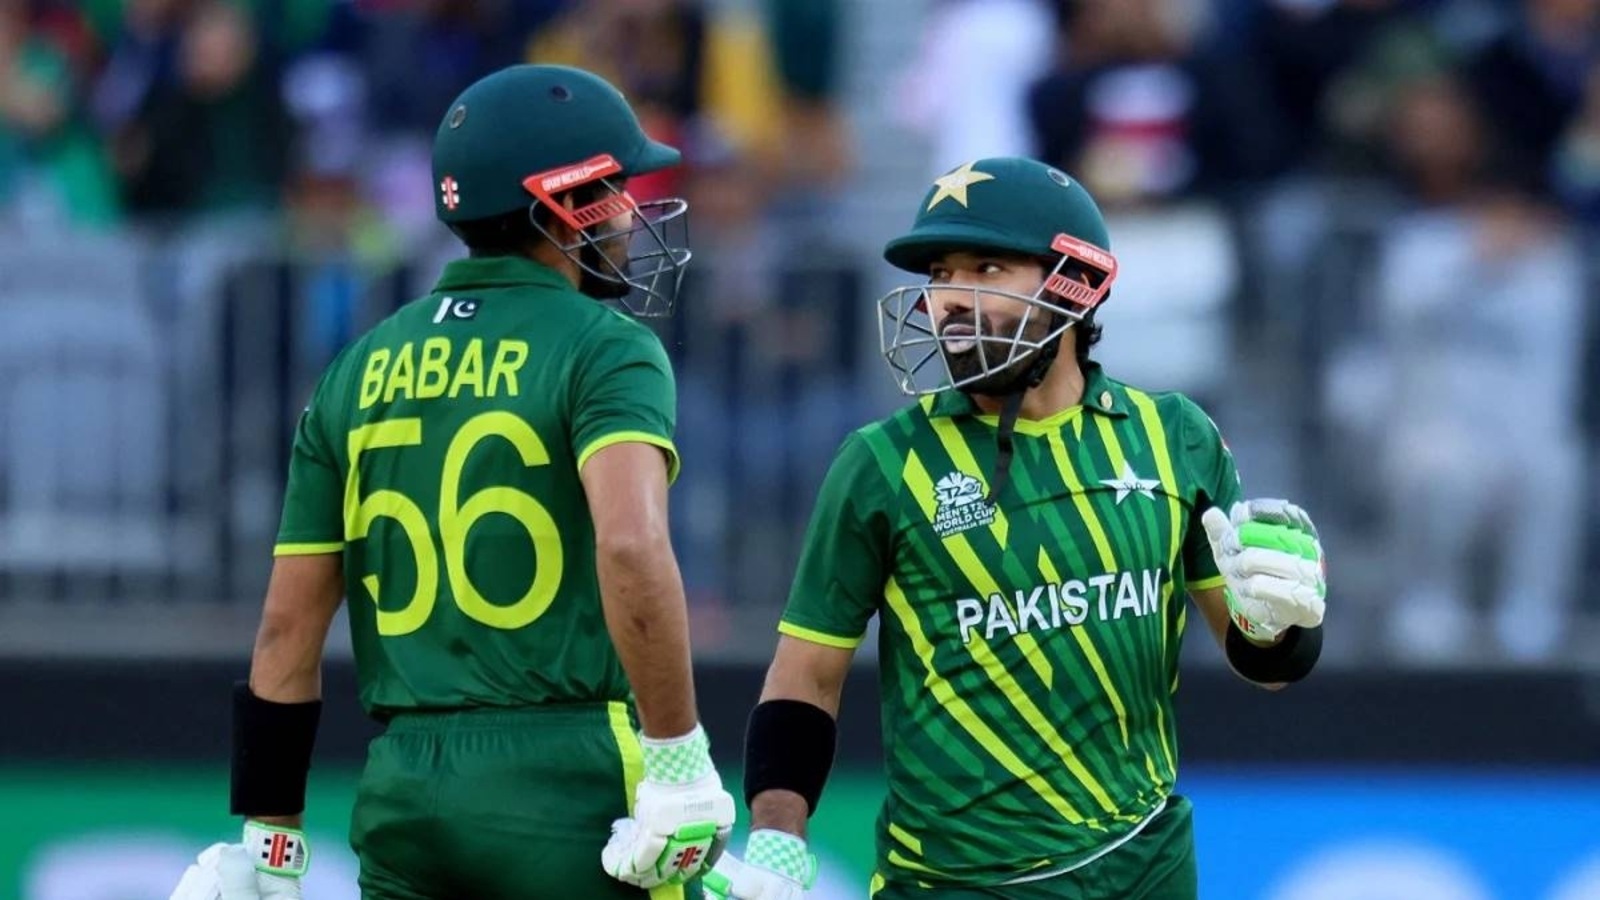 pakistan-vs-south-africa-live-score-t20-world-cup-2022-iftikhar-looks-to-give-pak-big-finish-sa-look-for-more-wickets